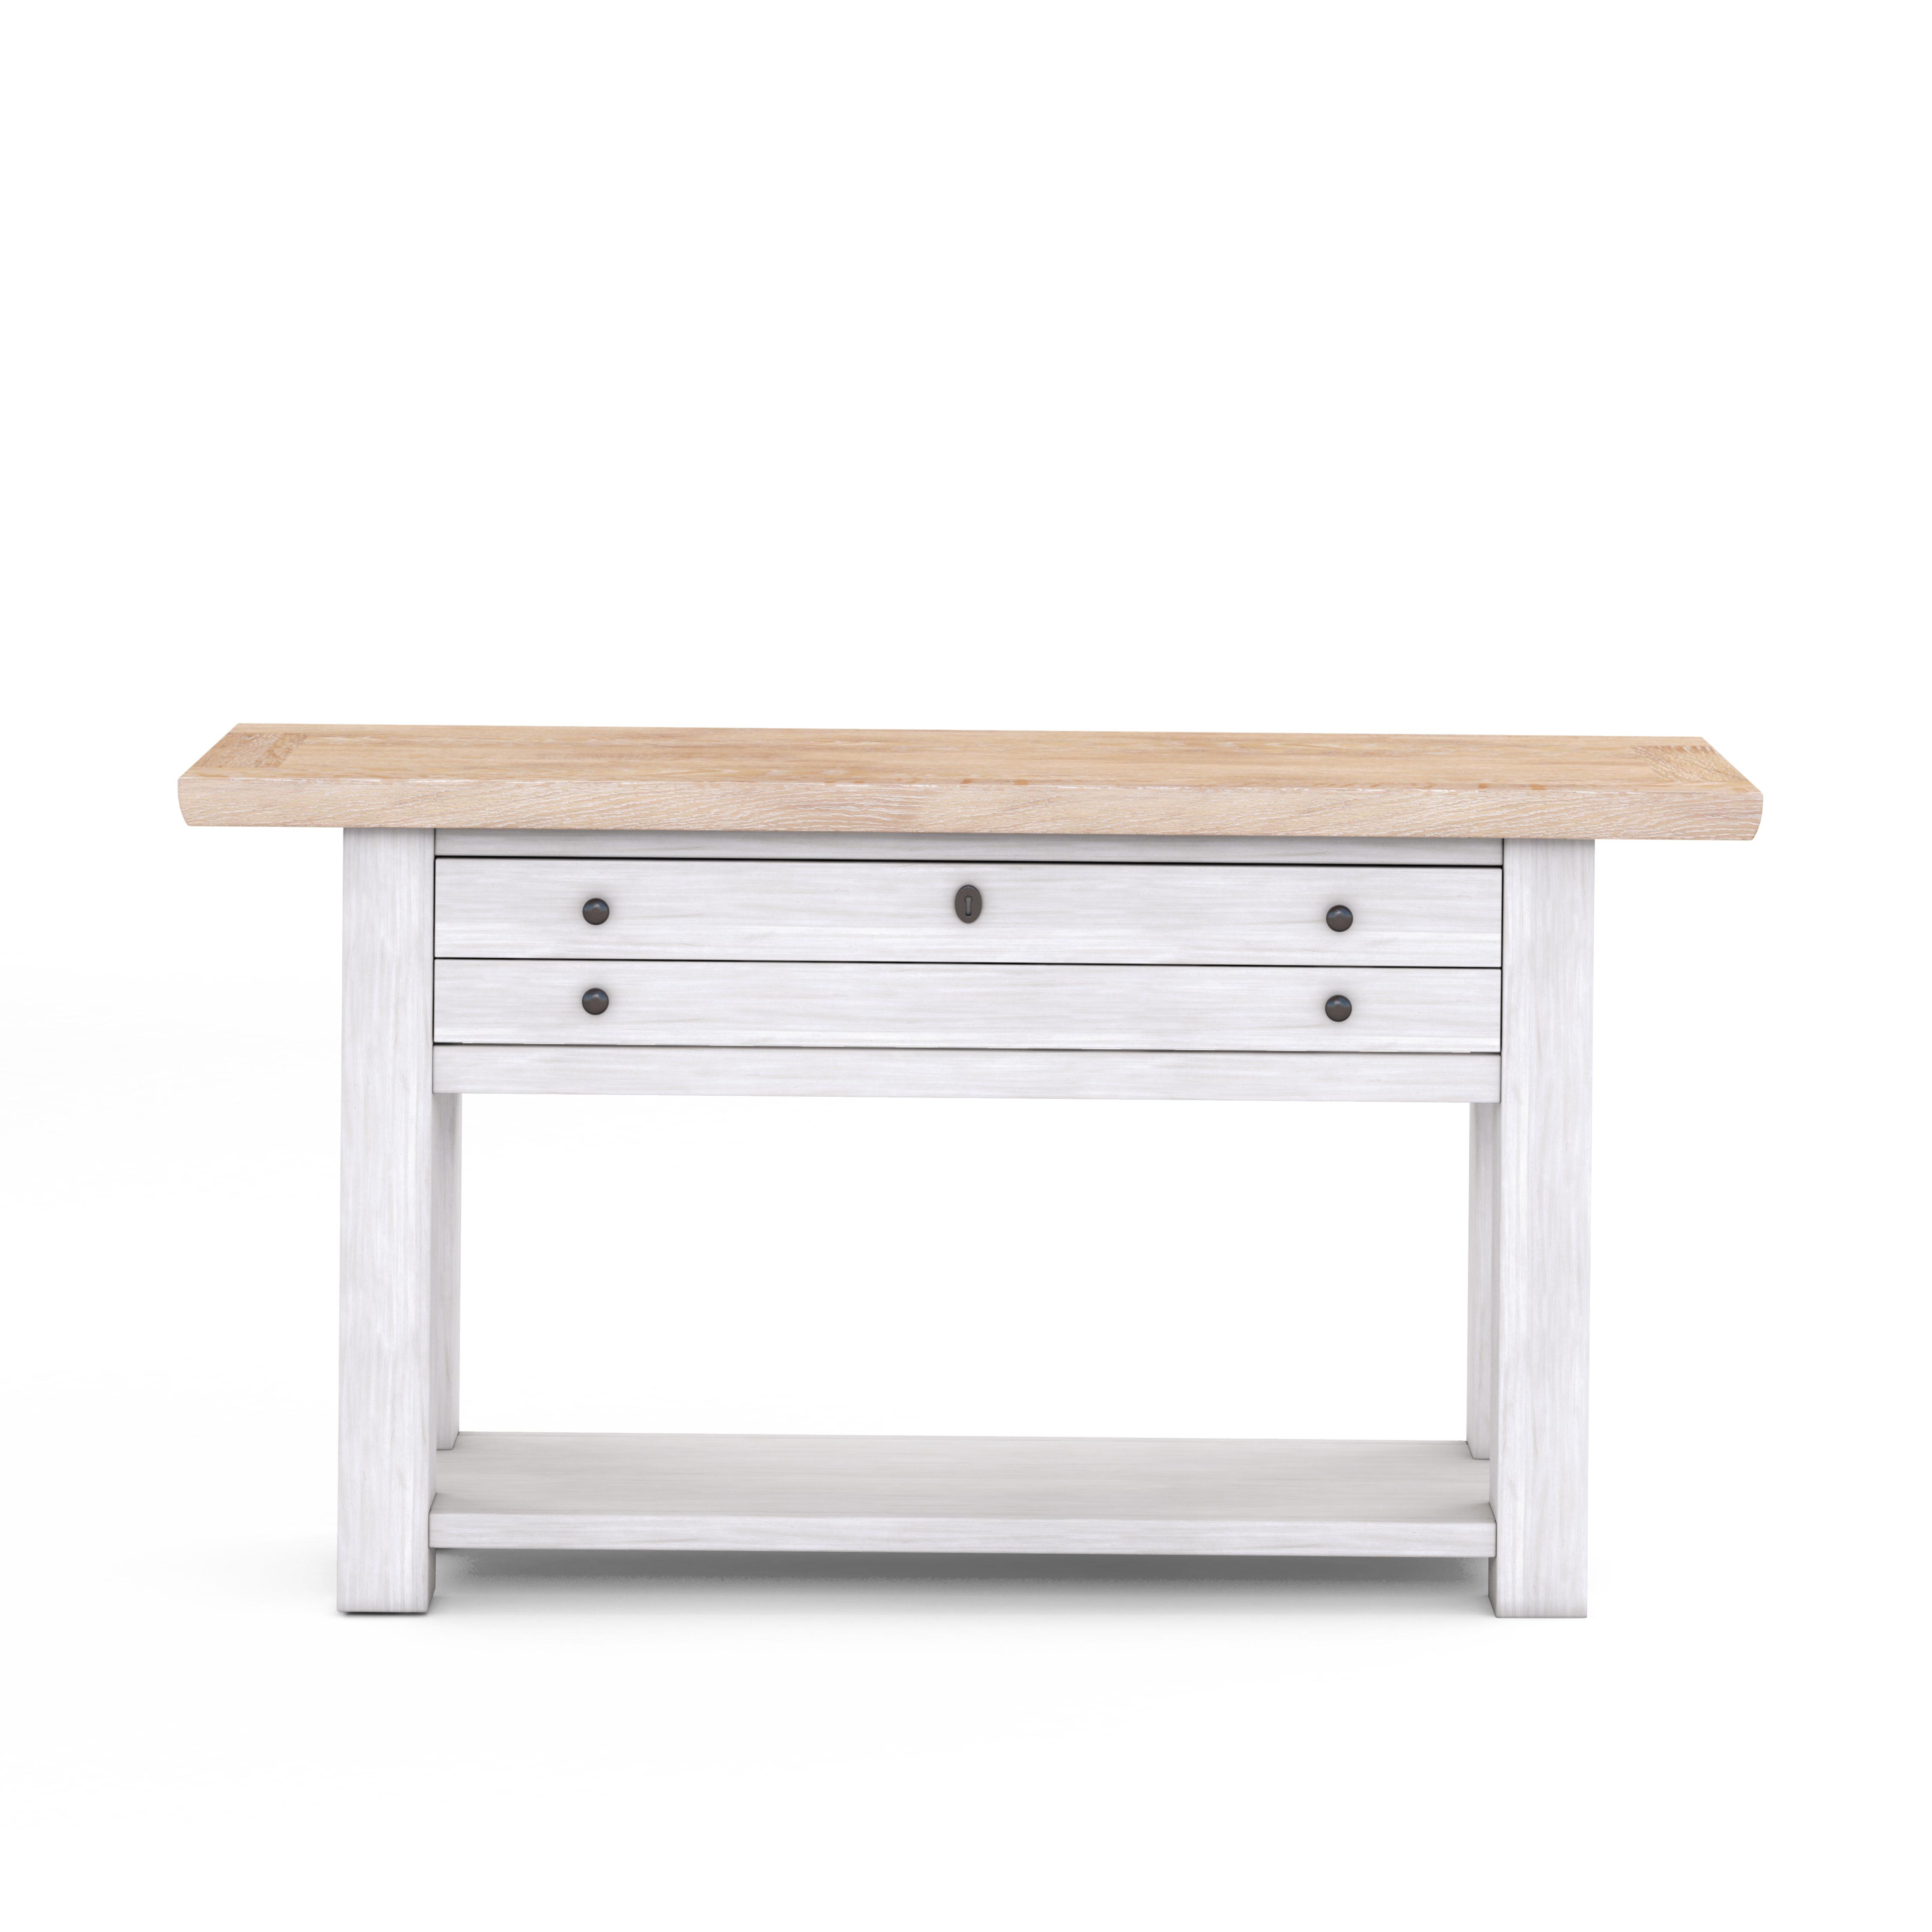 Traditional, Casual Sofa Table Post 288307-2340 in White 